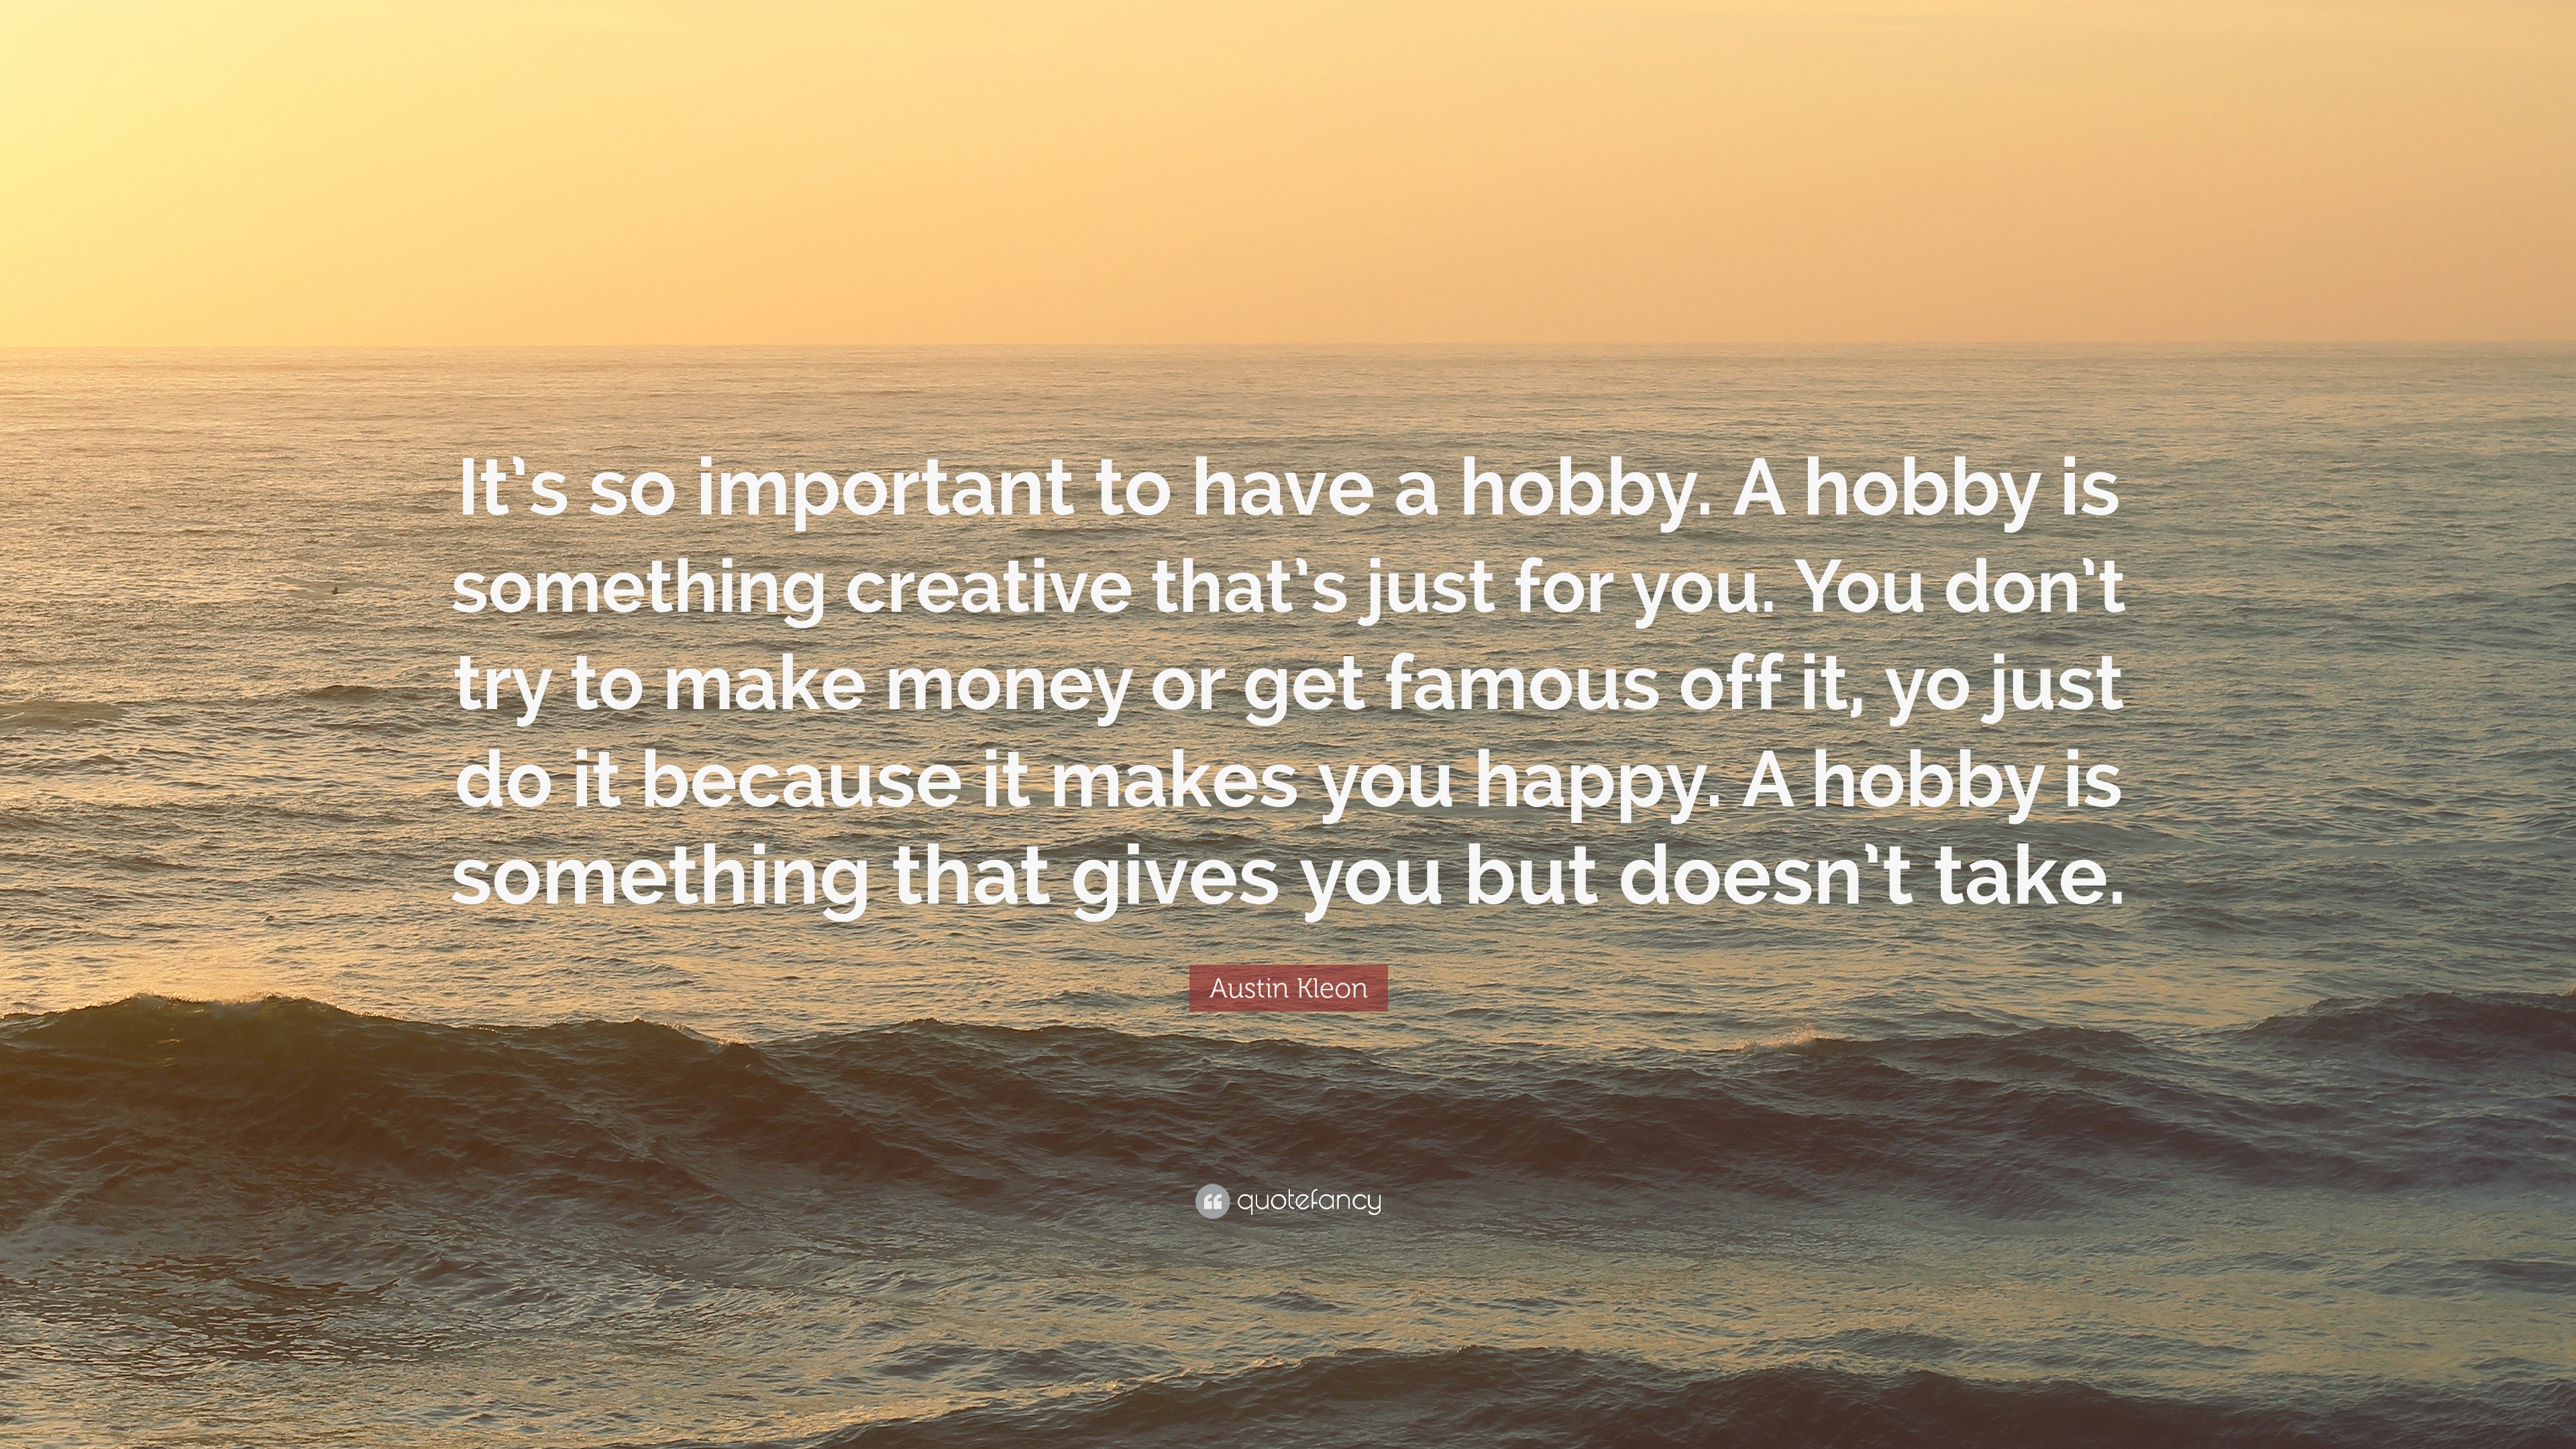 Find Out Why Is It Important To Have A Hobby!